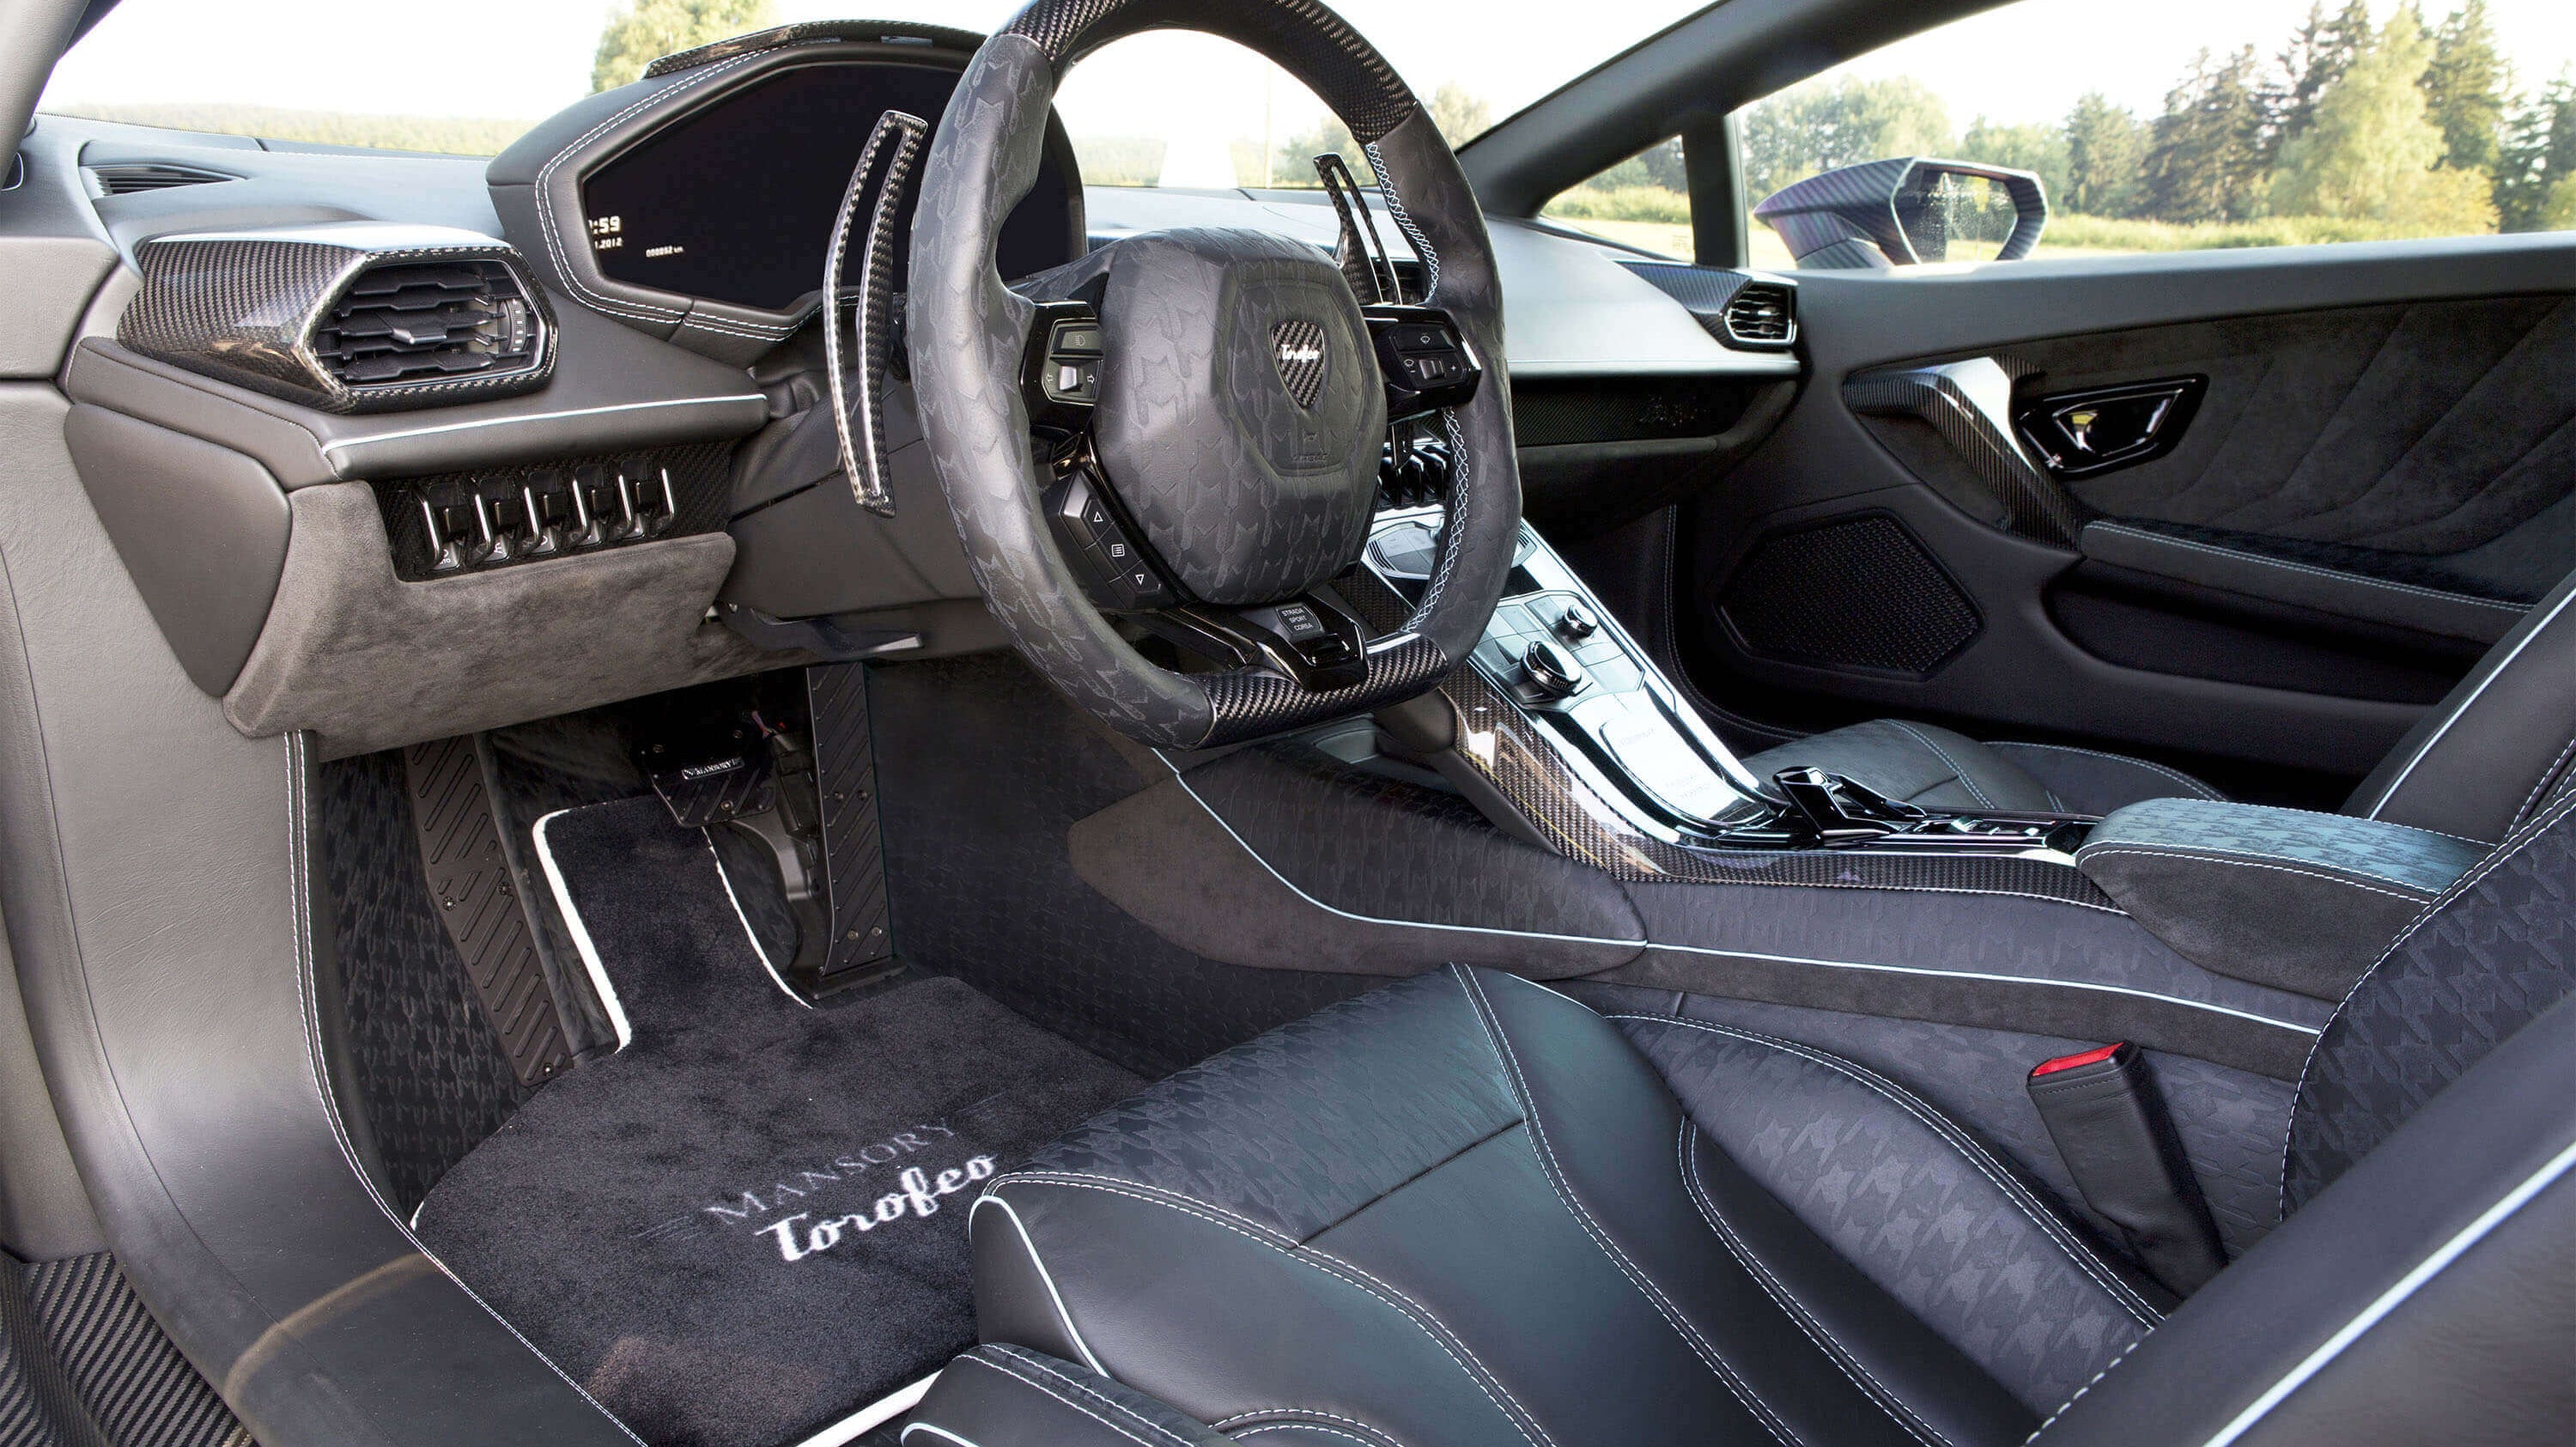 What are all the places where carbon fiber can be used in a car?